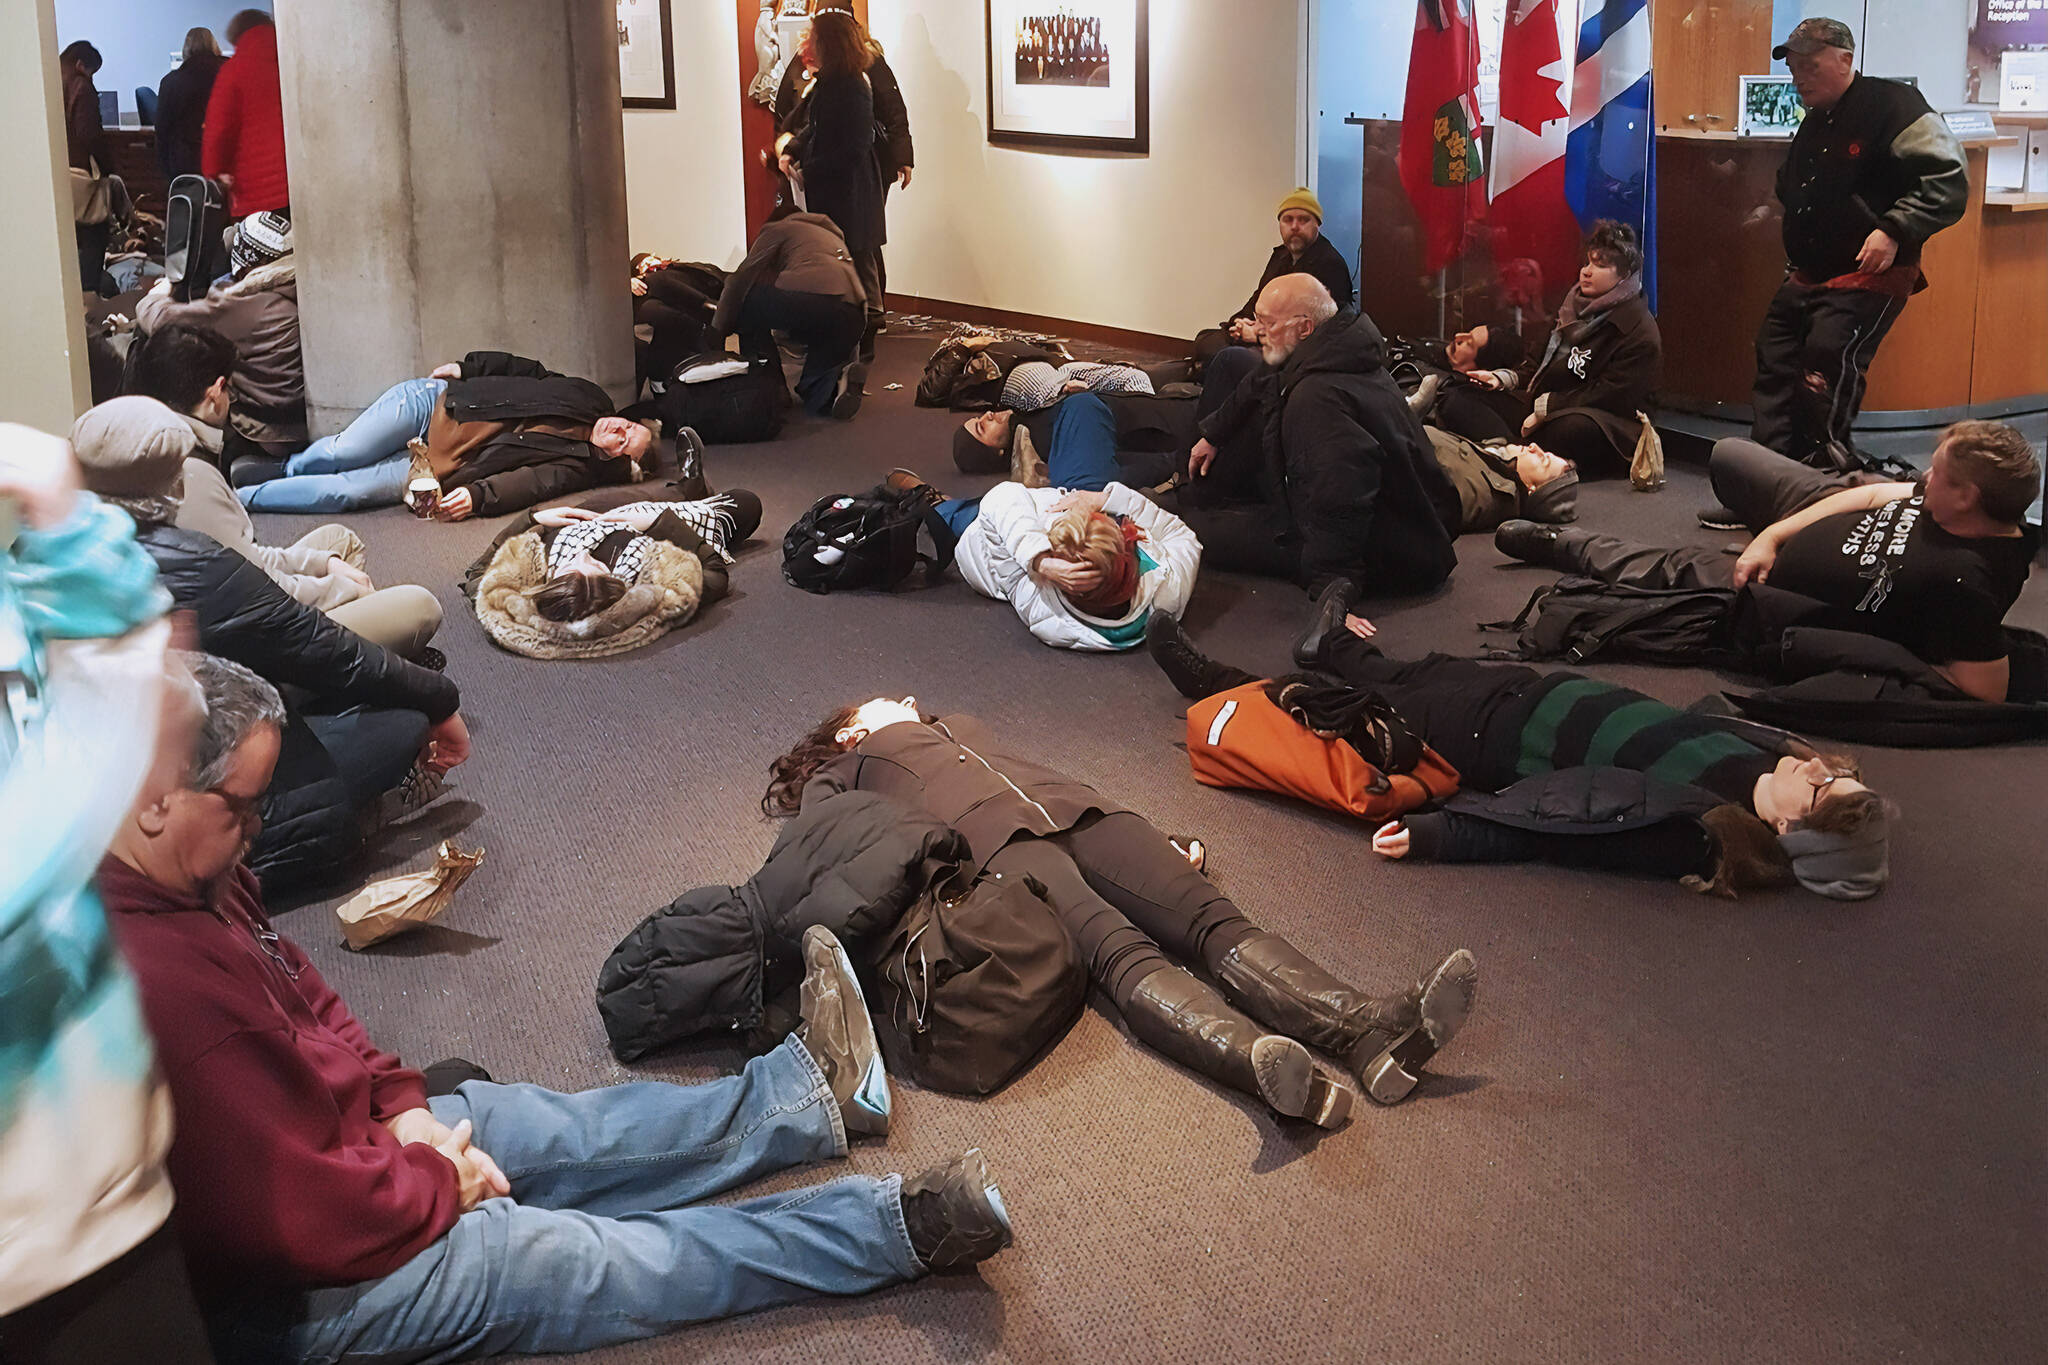 People Stage Die In At Toronto Mayors Office To Protest Homeless Deaths 